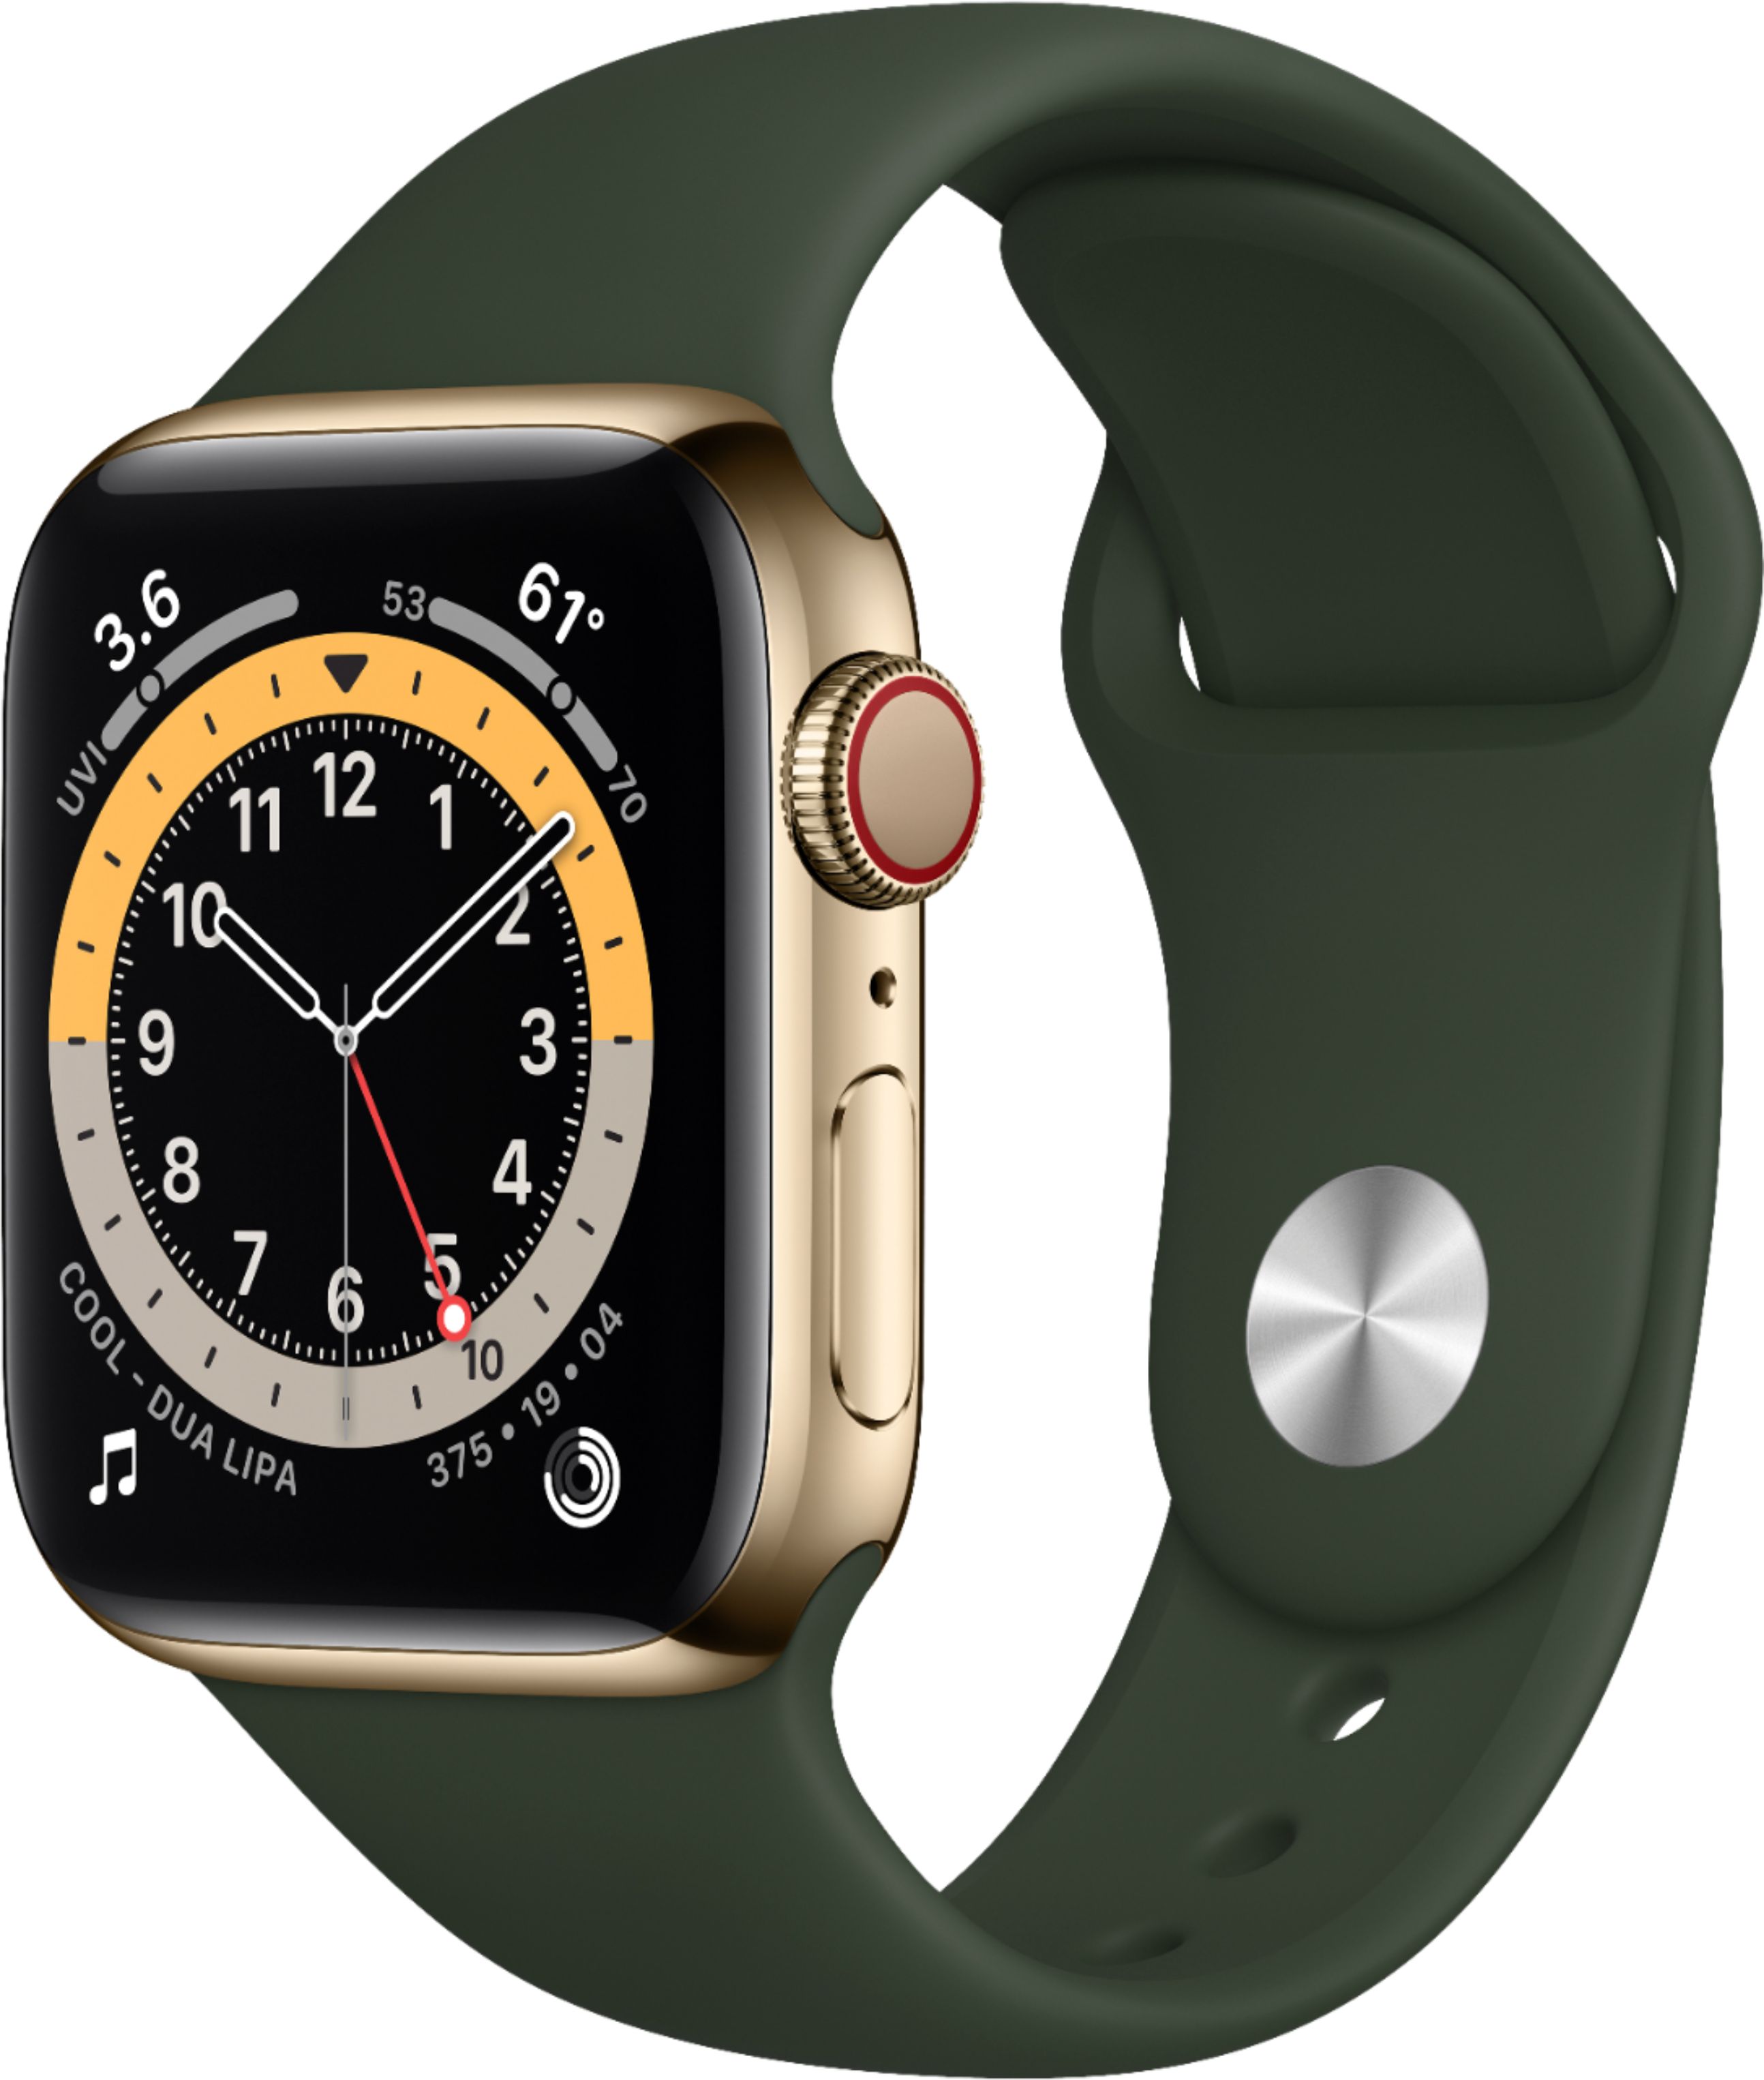 PC/タブレット PC周辺機器 Best Buy: Apple Watch Series 6 (GPS + Cellular) 40mm Gold 